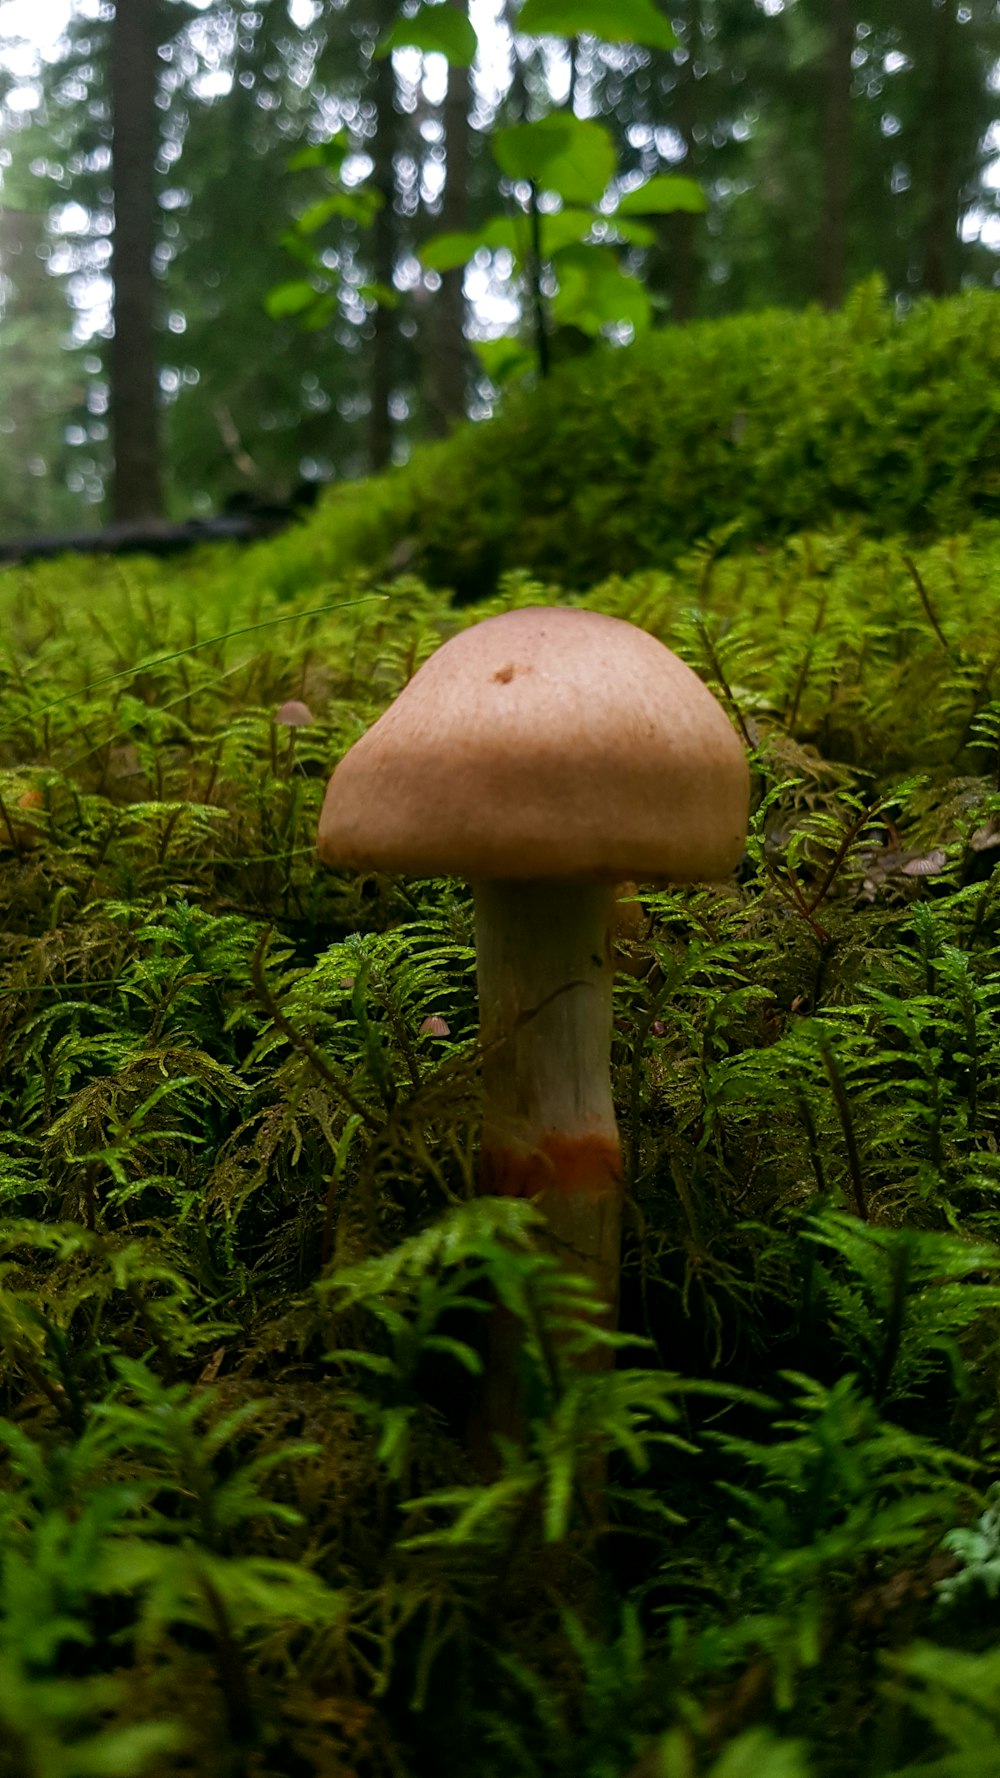 a mushroom sitting in the middle of a lush green forest